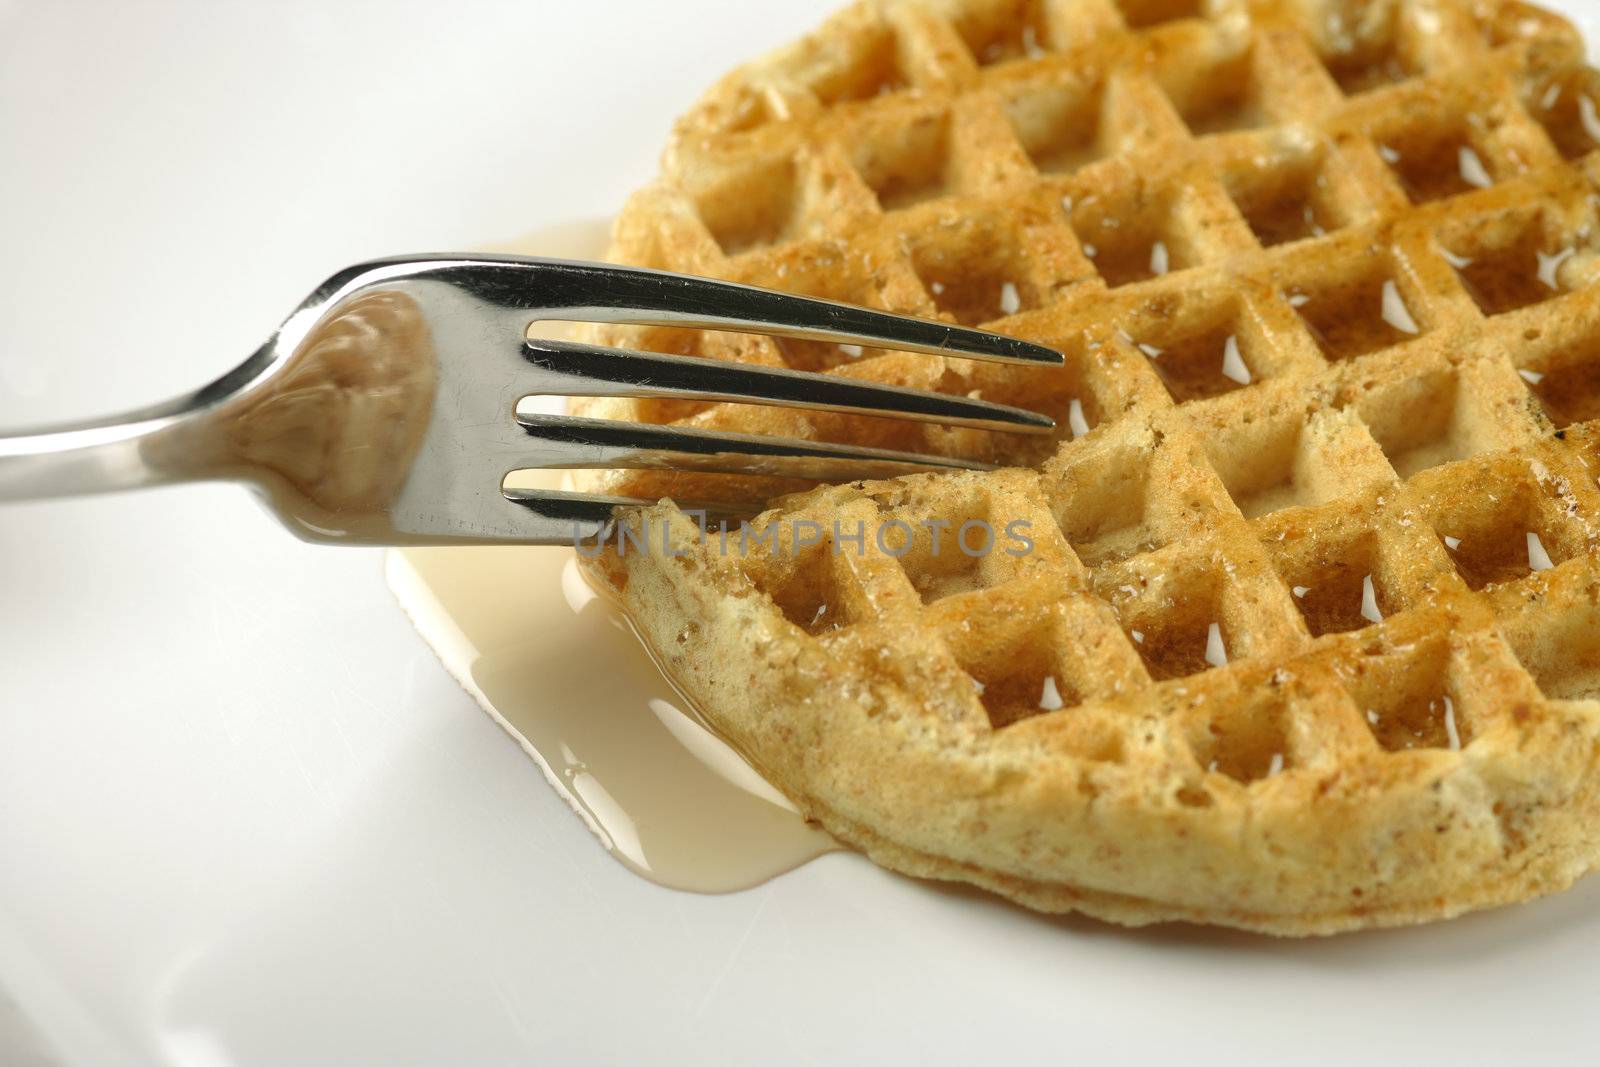 Closeup of a fork cutting through a waffle covered with maple syrup.